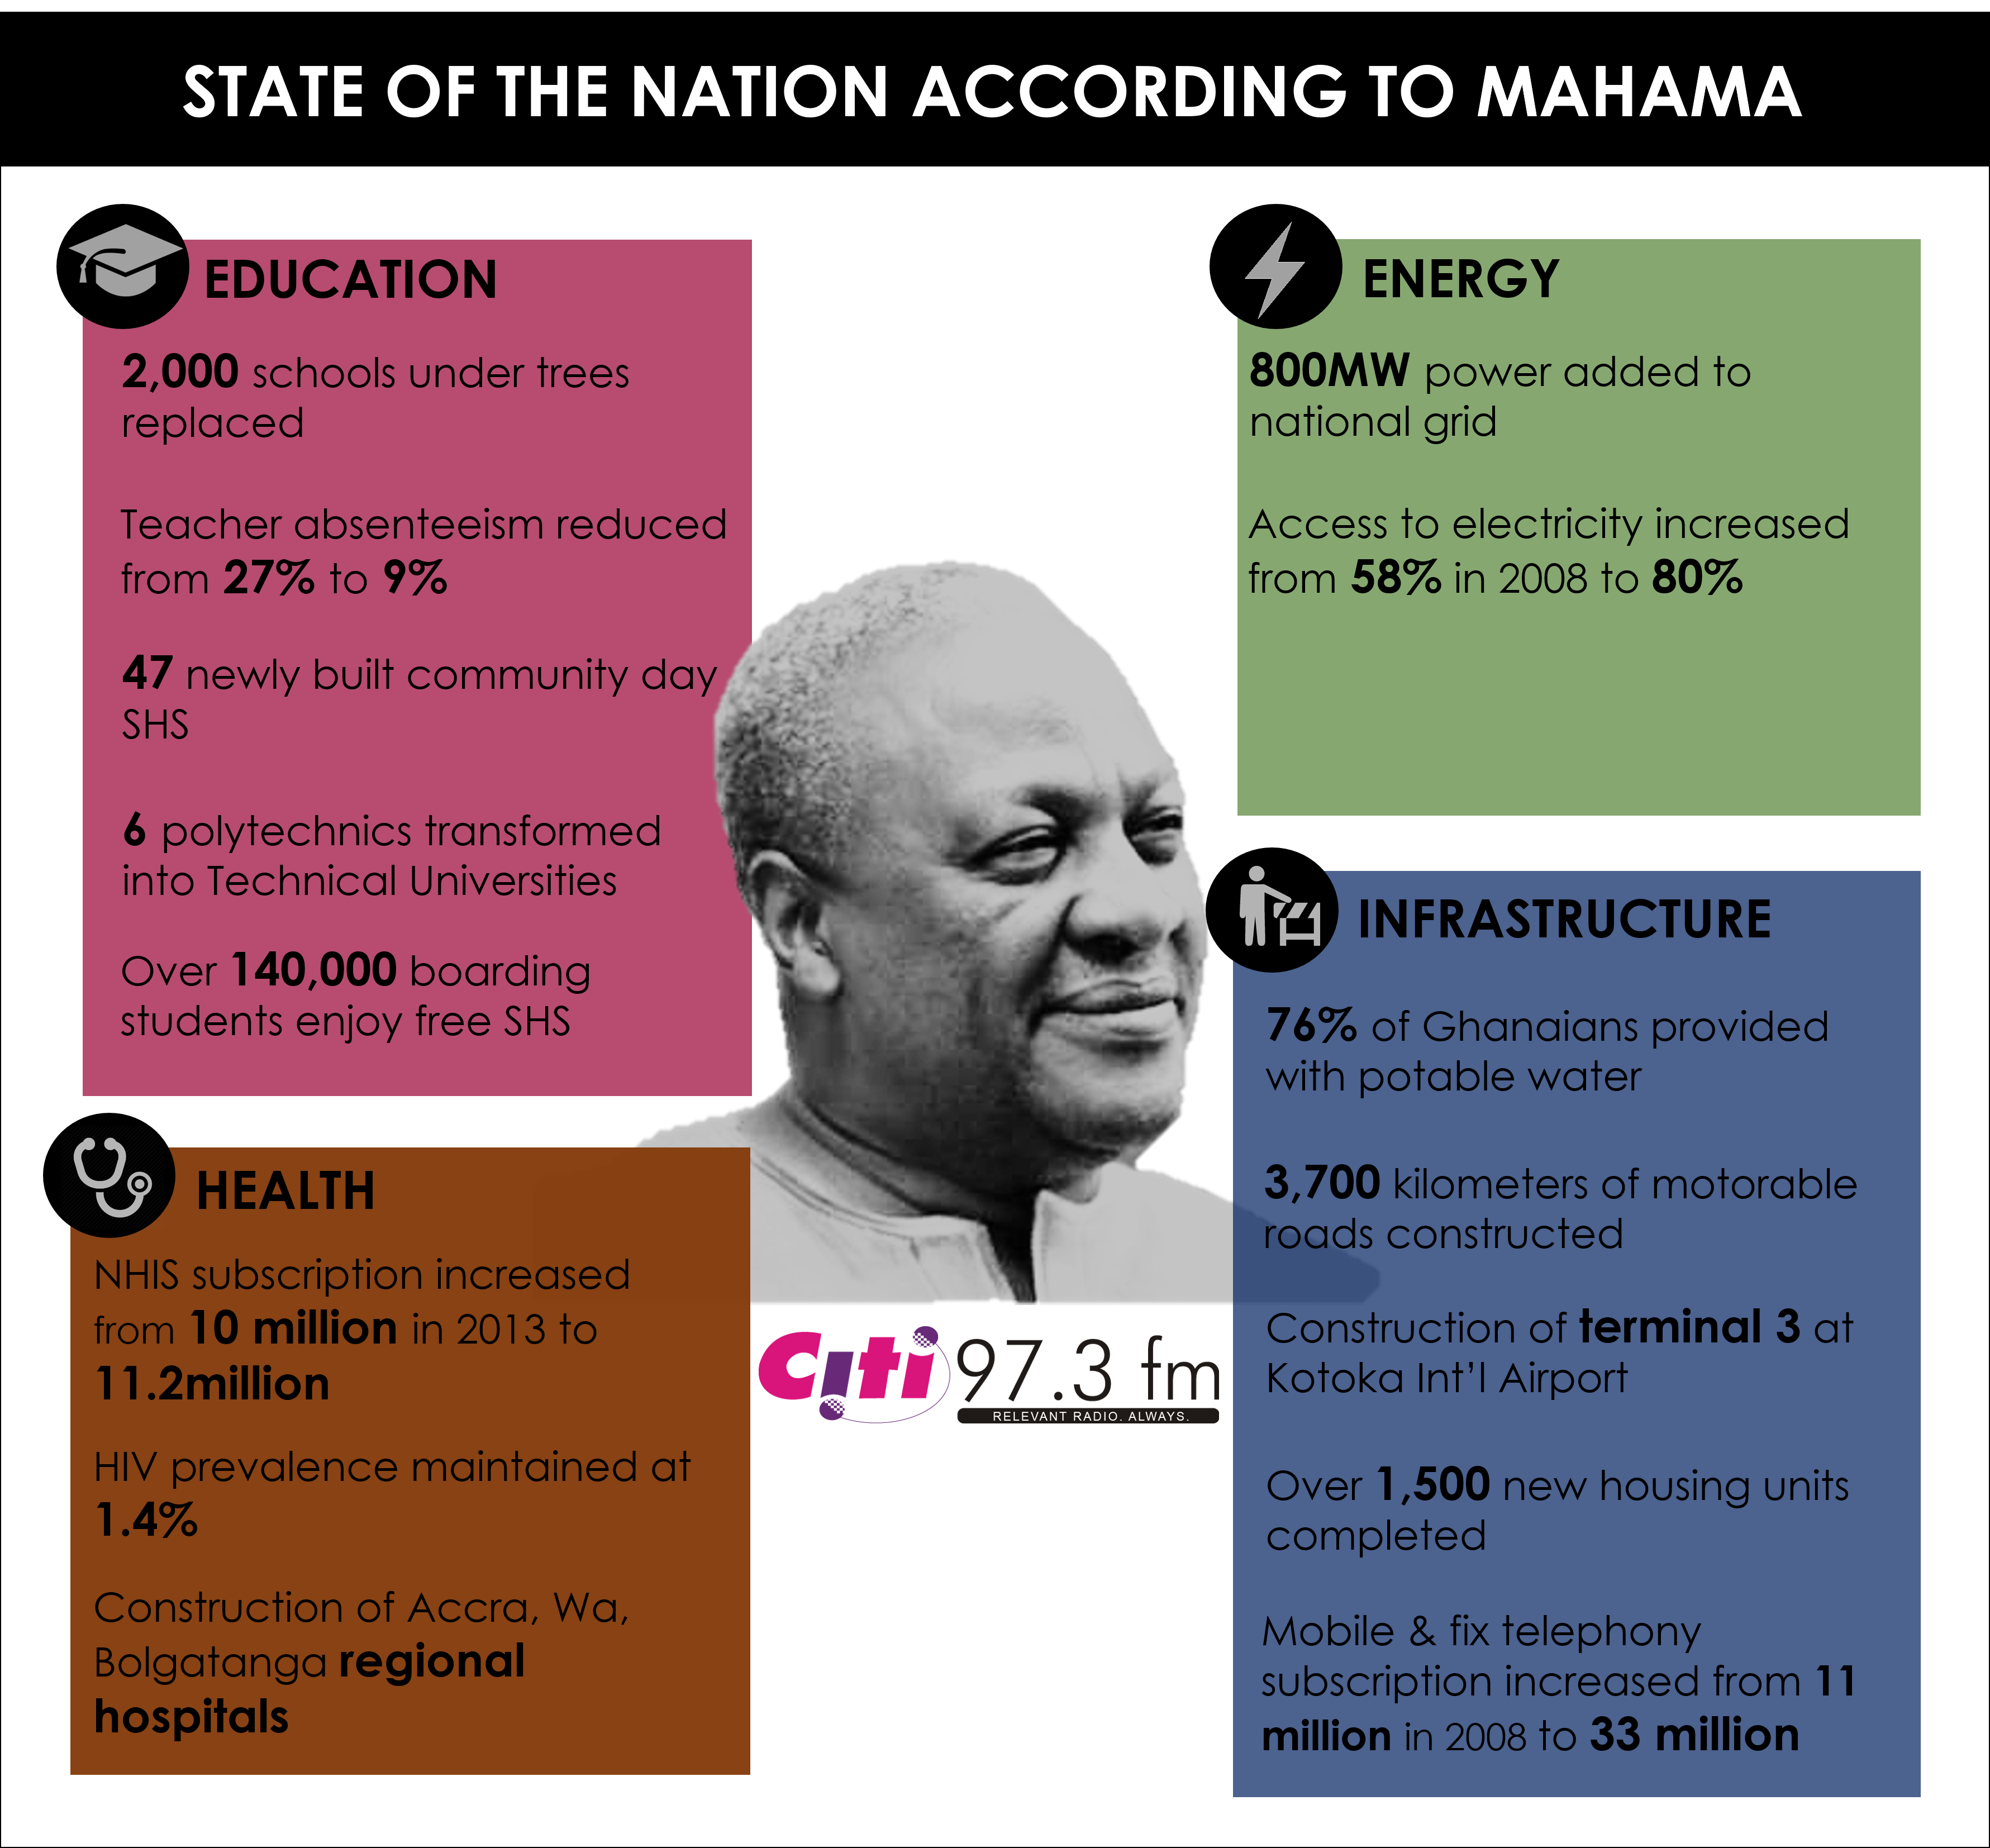 mahama-state-of-the-nation